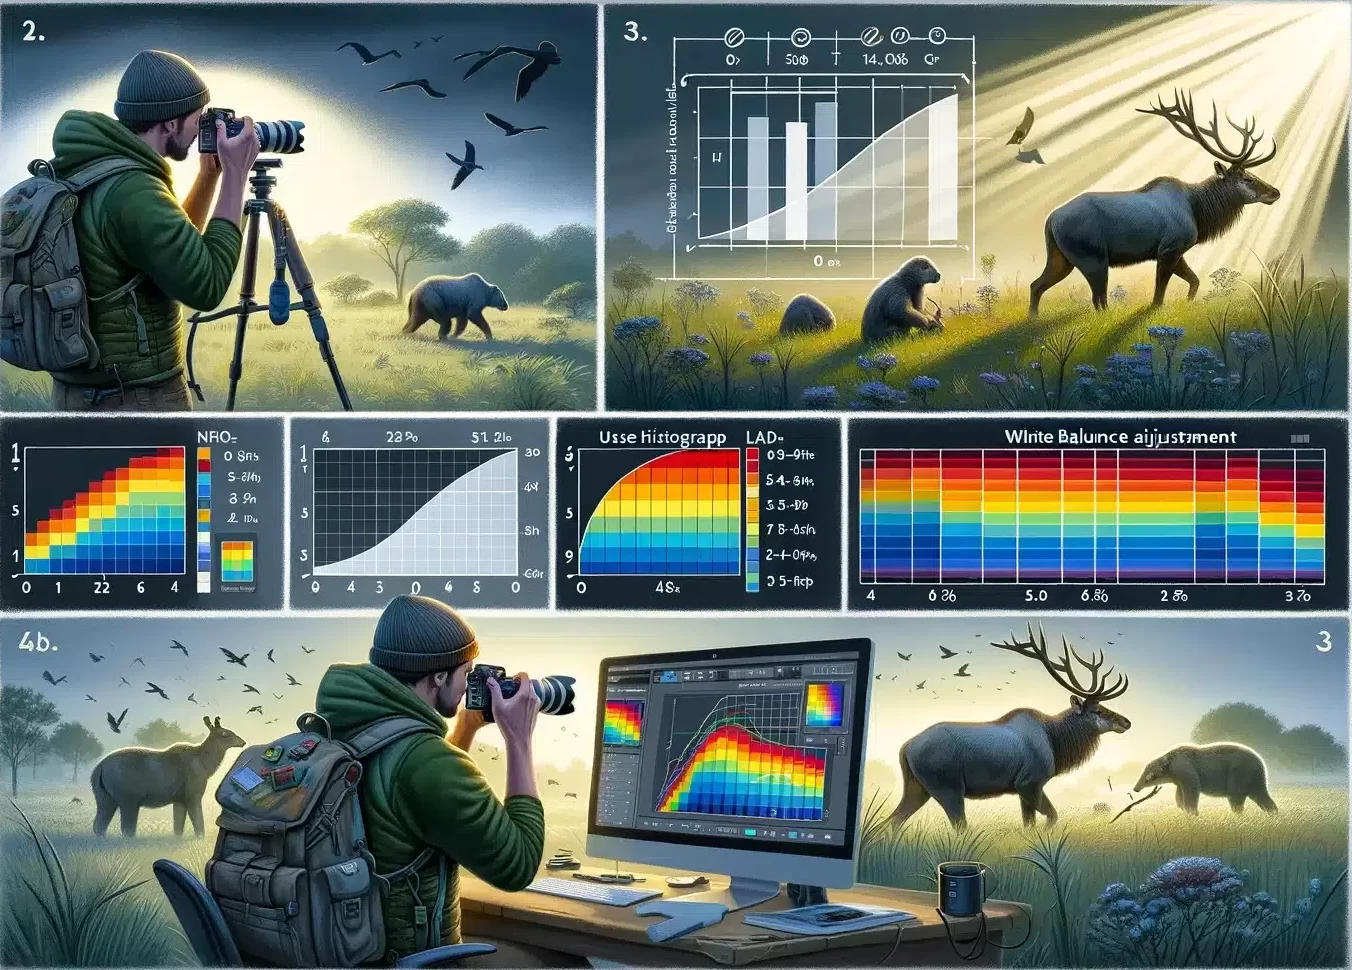 Wildlife photographer adjusts white balance through observation, histogram analysis, test shots, manual settings with a card, and post-processing.